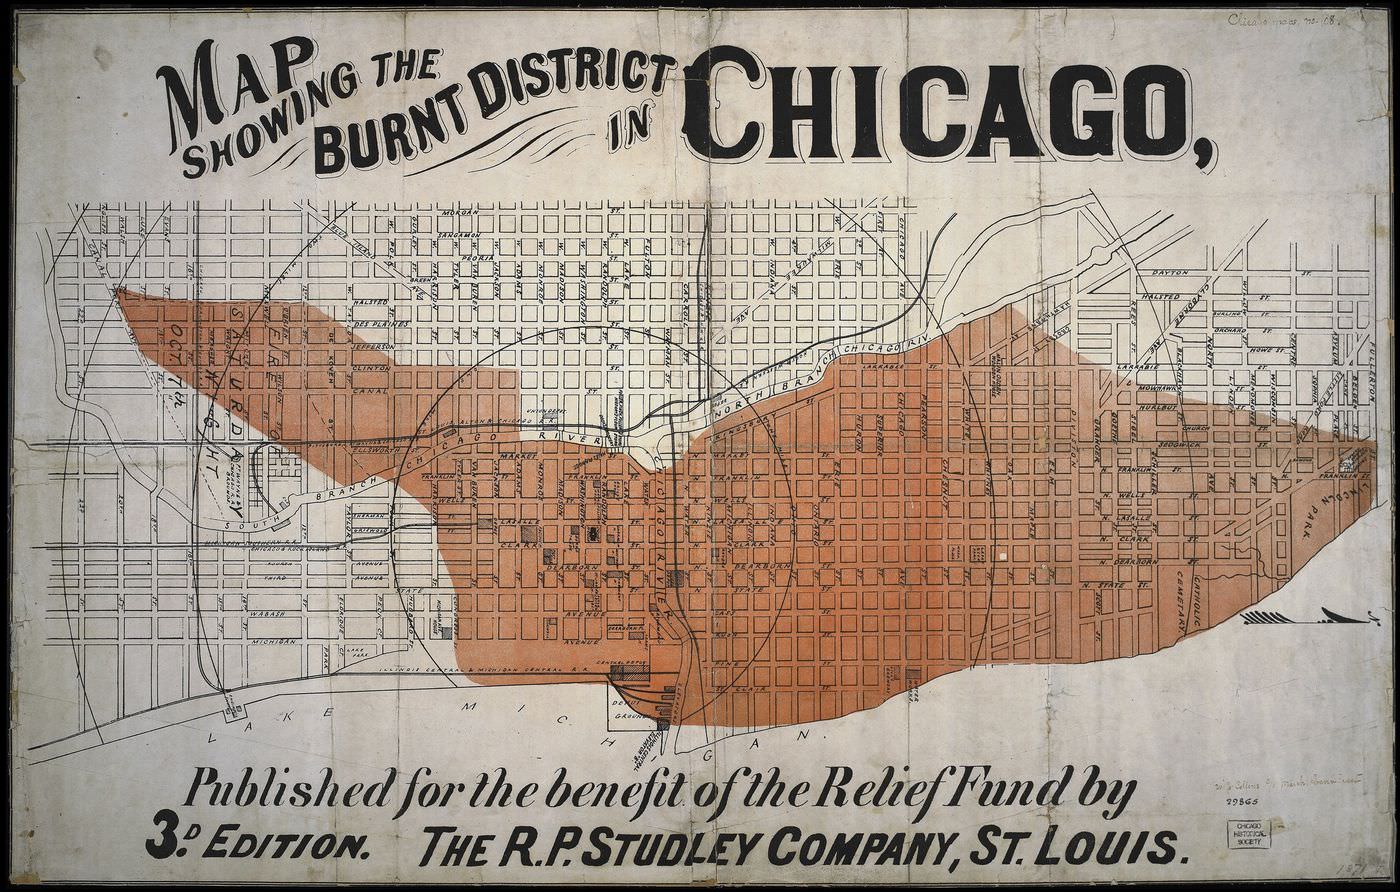 "Map Showing the Burnt District in Chicago" shows the level of destruction of the 1871 Great Chicago Fire.